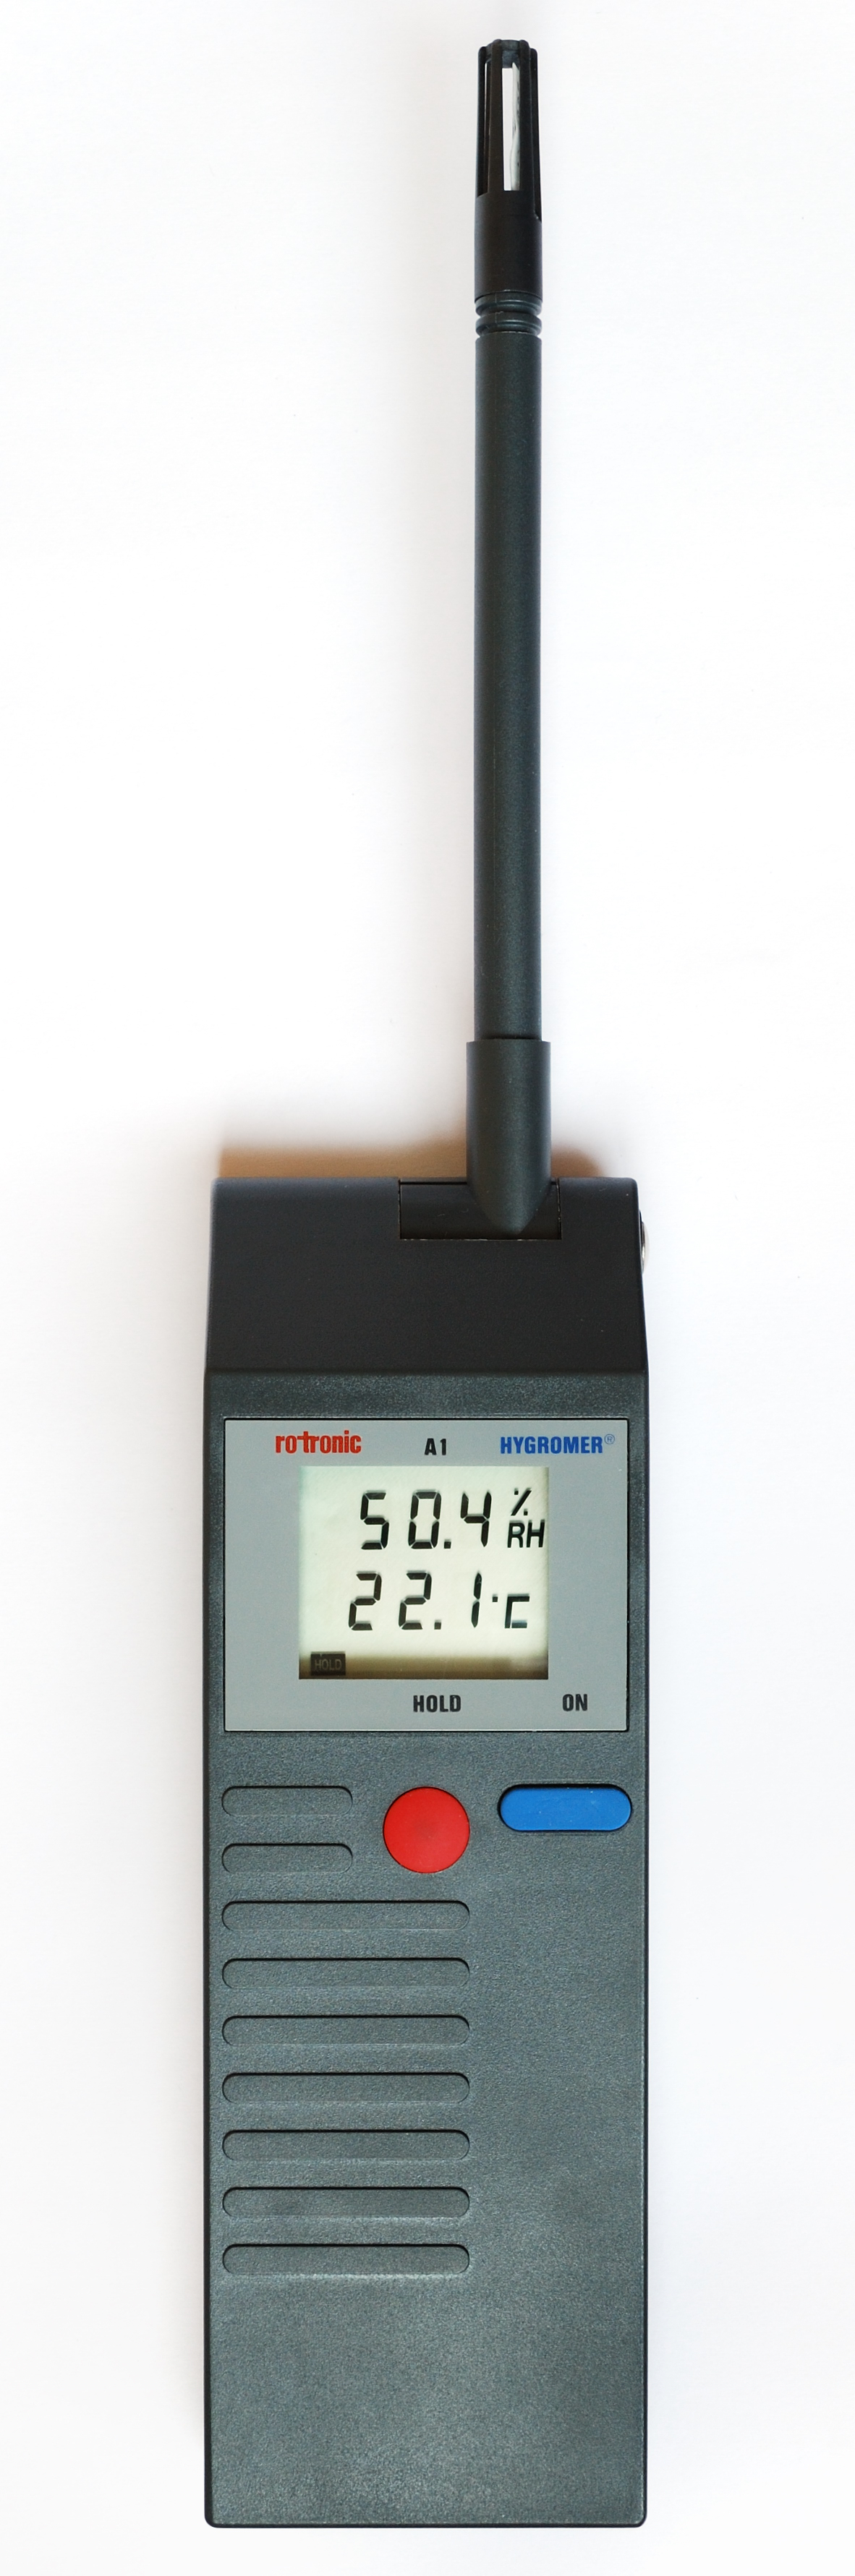 Thermohygrometer rotronic A1